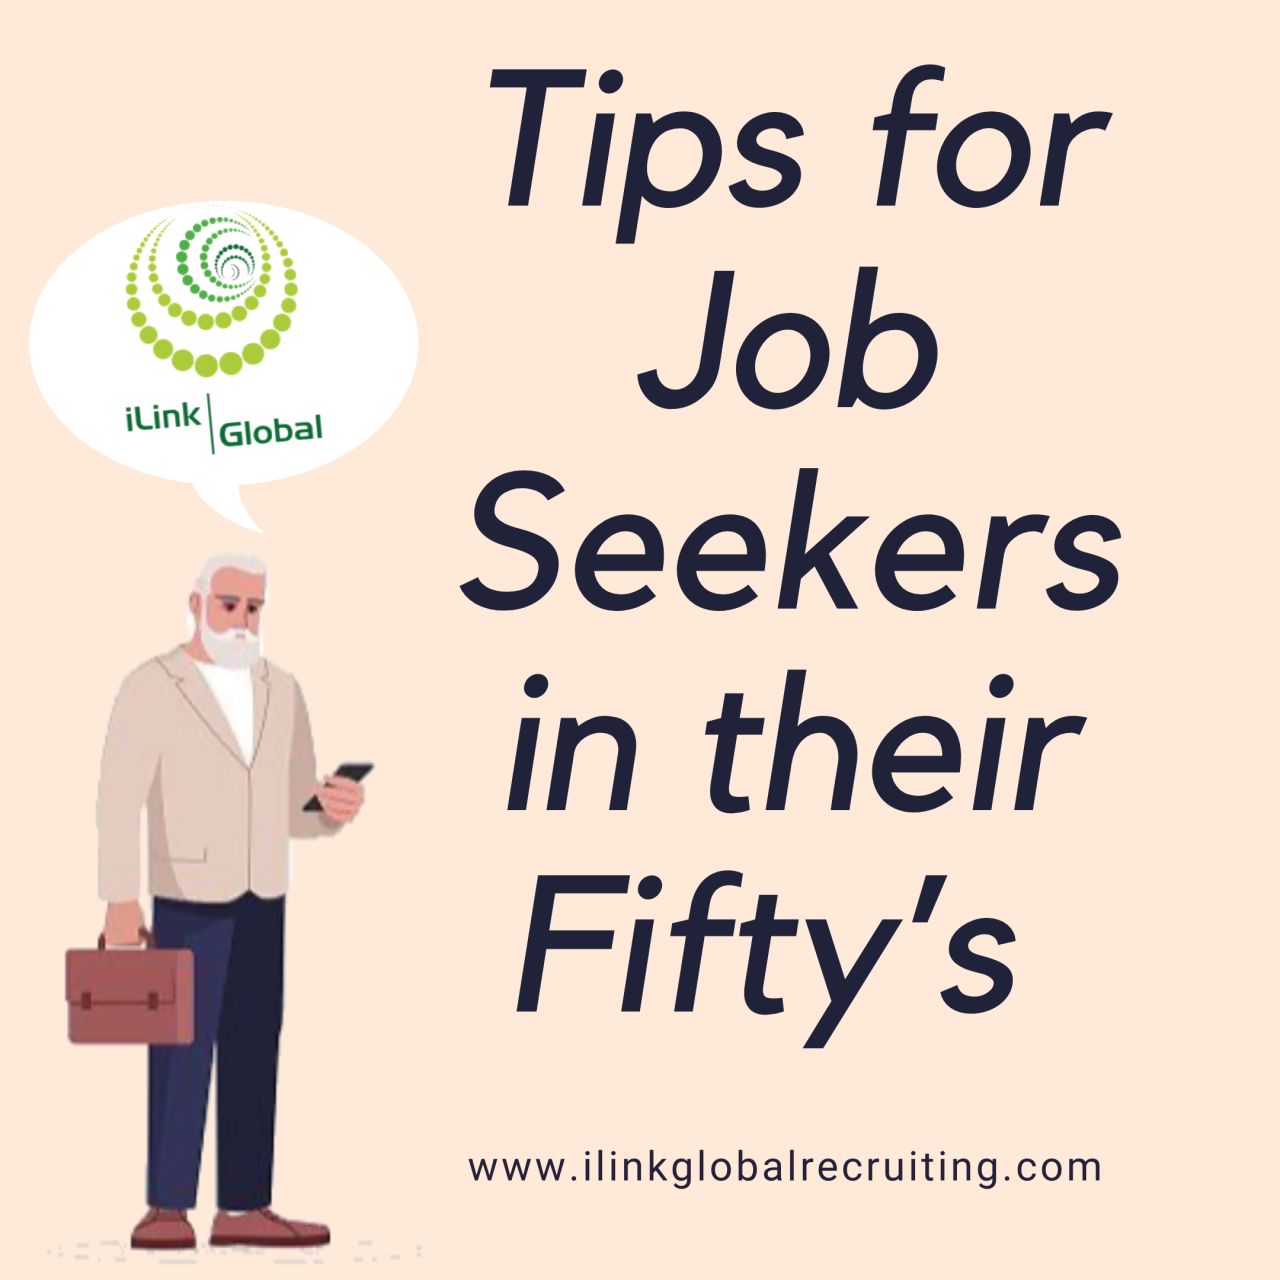 Tips for Job Seekers in Their Fifty's